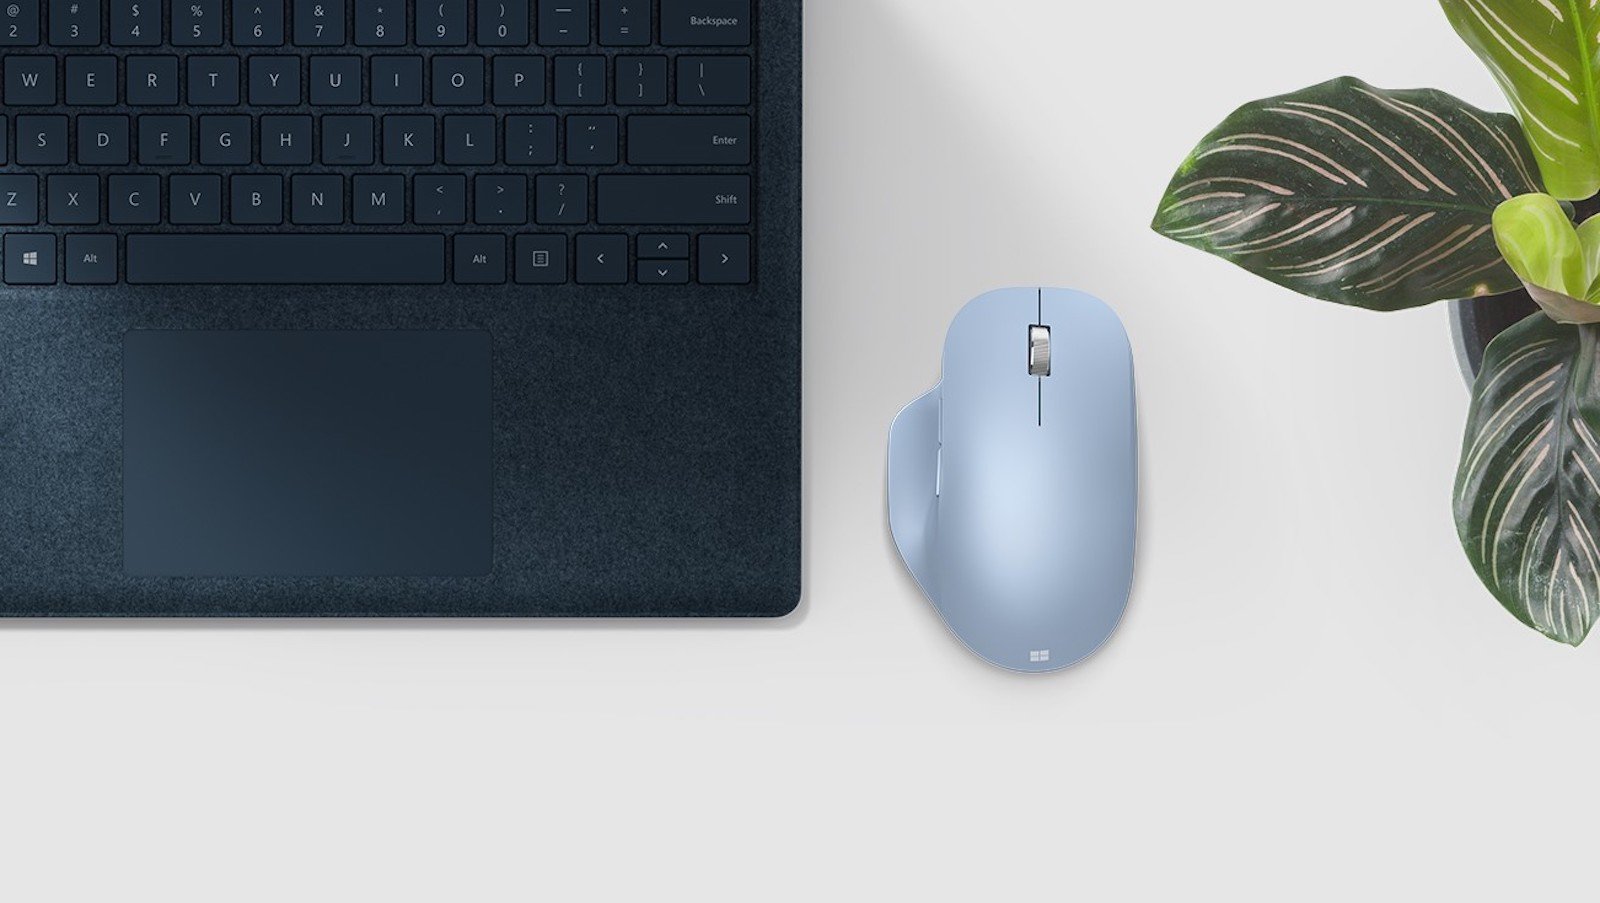 Microsoft Bluetooth Ergonomic Mouse has two customizable buttons